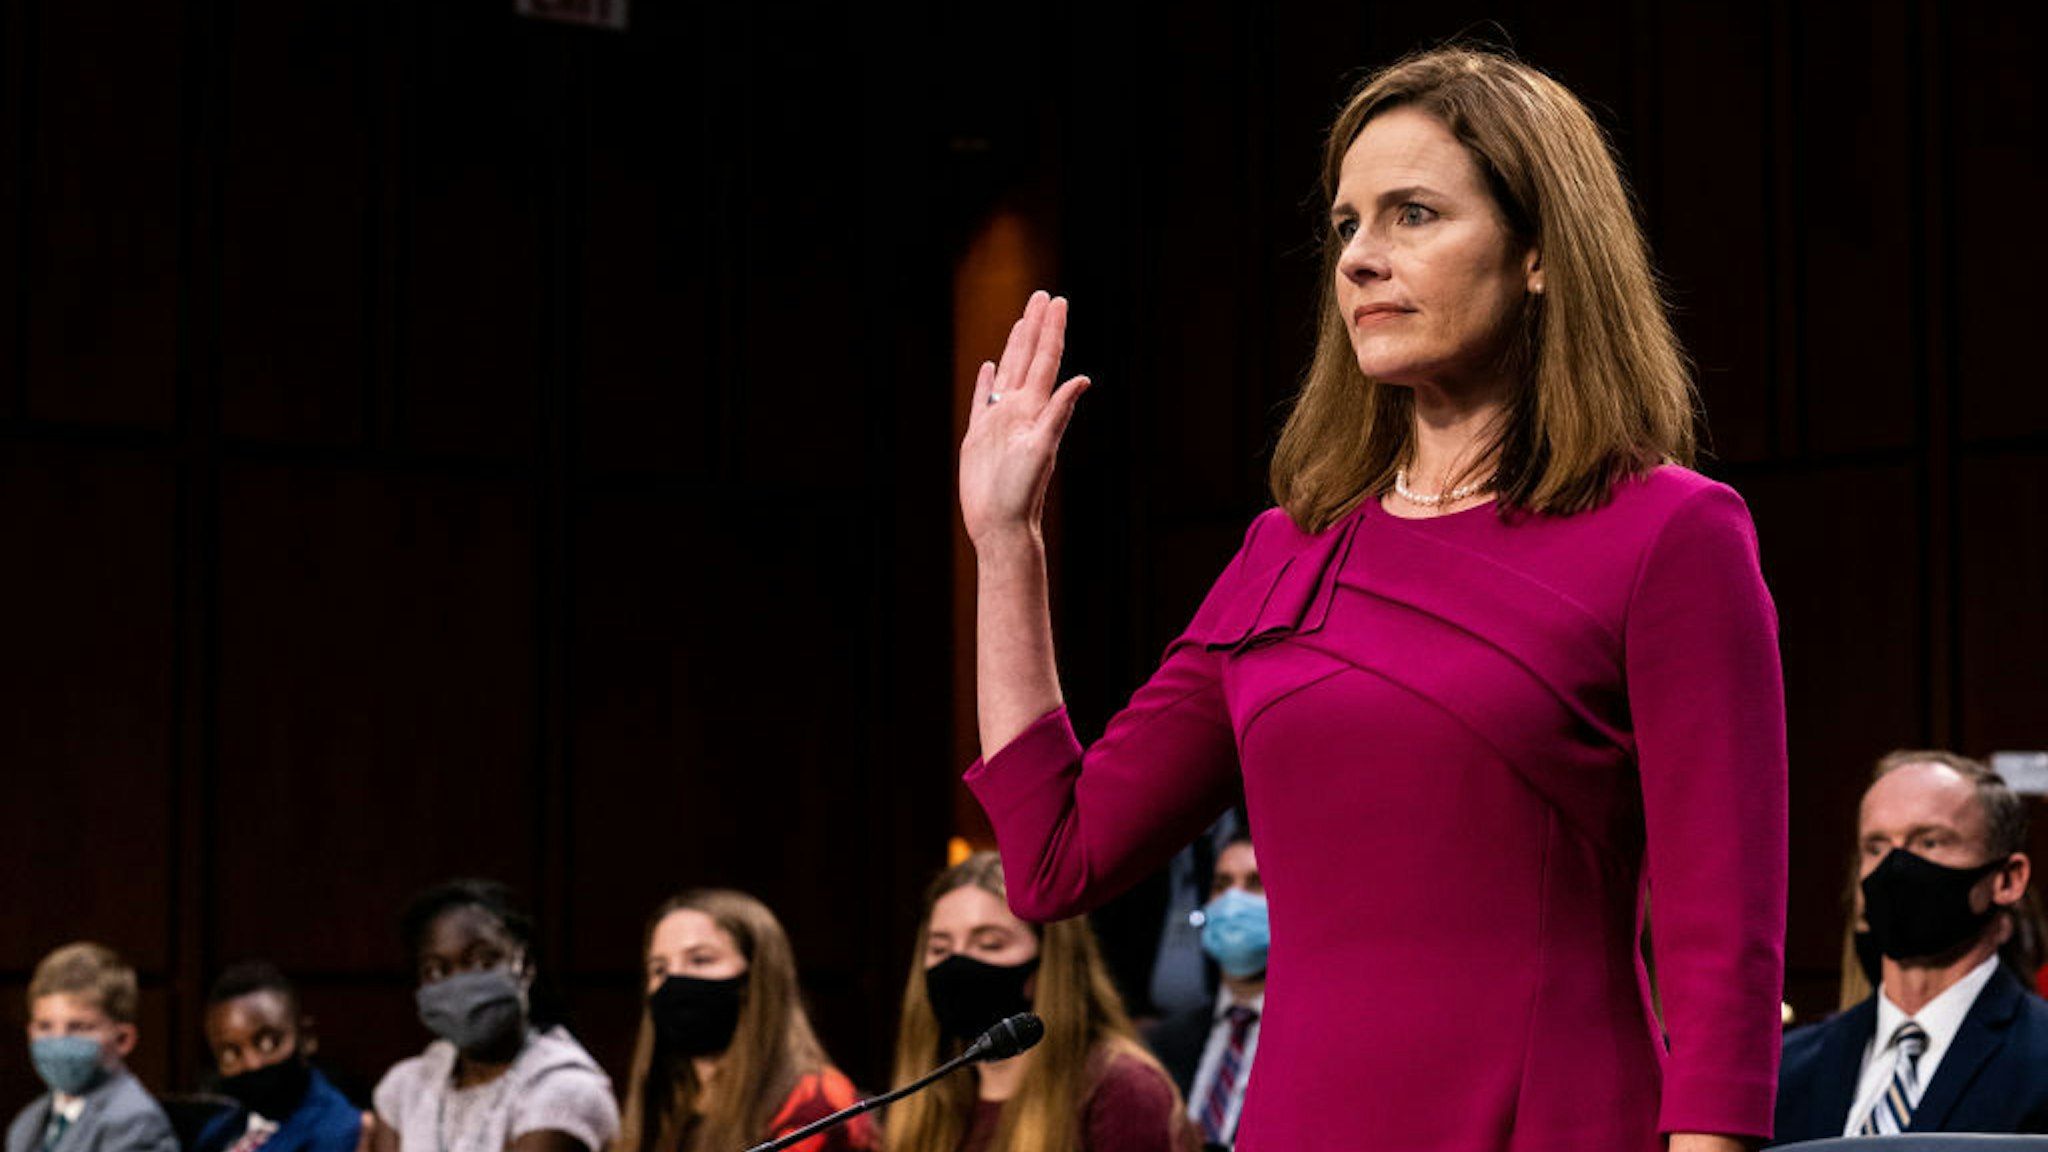 Supreme Court Justice nominee Judge Amy Coney Barrett stands as she is sworn in during the Senate Judiciary Committee confirmation hearing for Supreme Court Justice in the Hart Senate Office Building on October 12, 2020 in Washington, DC. With less than a month until the presidential election, President Donald Trump tapped Amy Coney Barrett to be his third Supreme Court nominee in just four years. If confirmed, Barrett would replace the late Associate Justice Ruth Bader Ginsburg. (Erin Schaff-Pool/Getty Images)